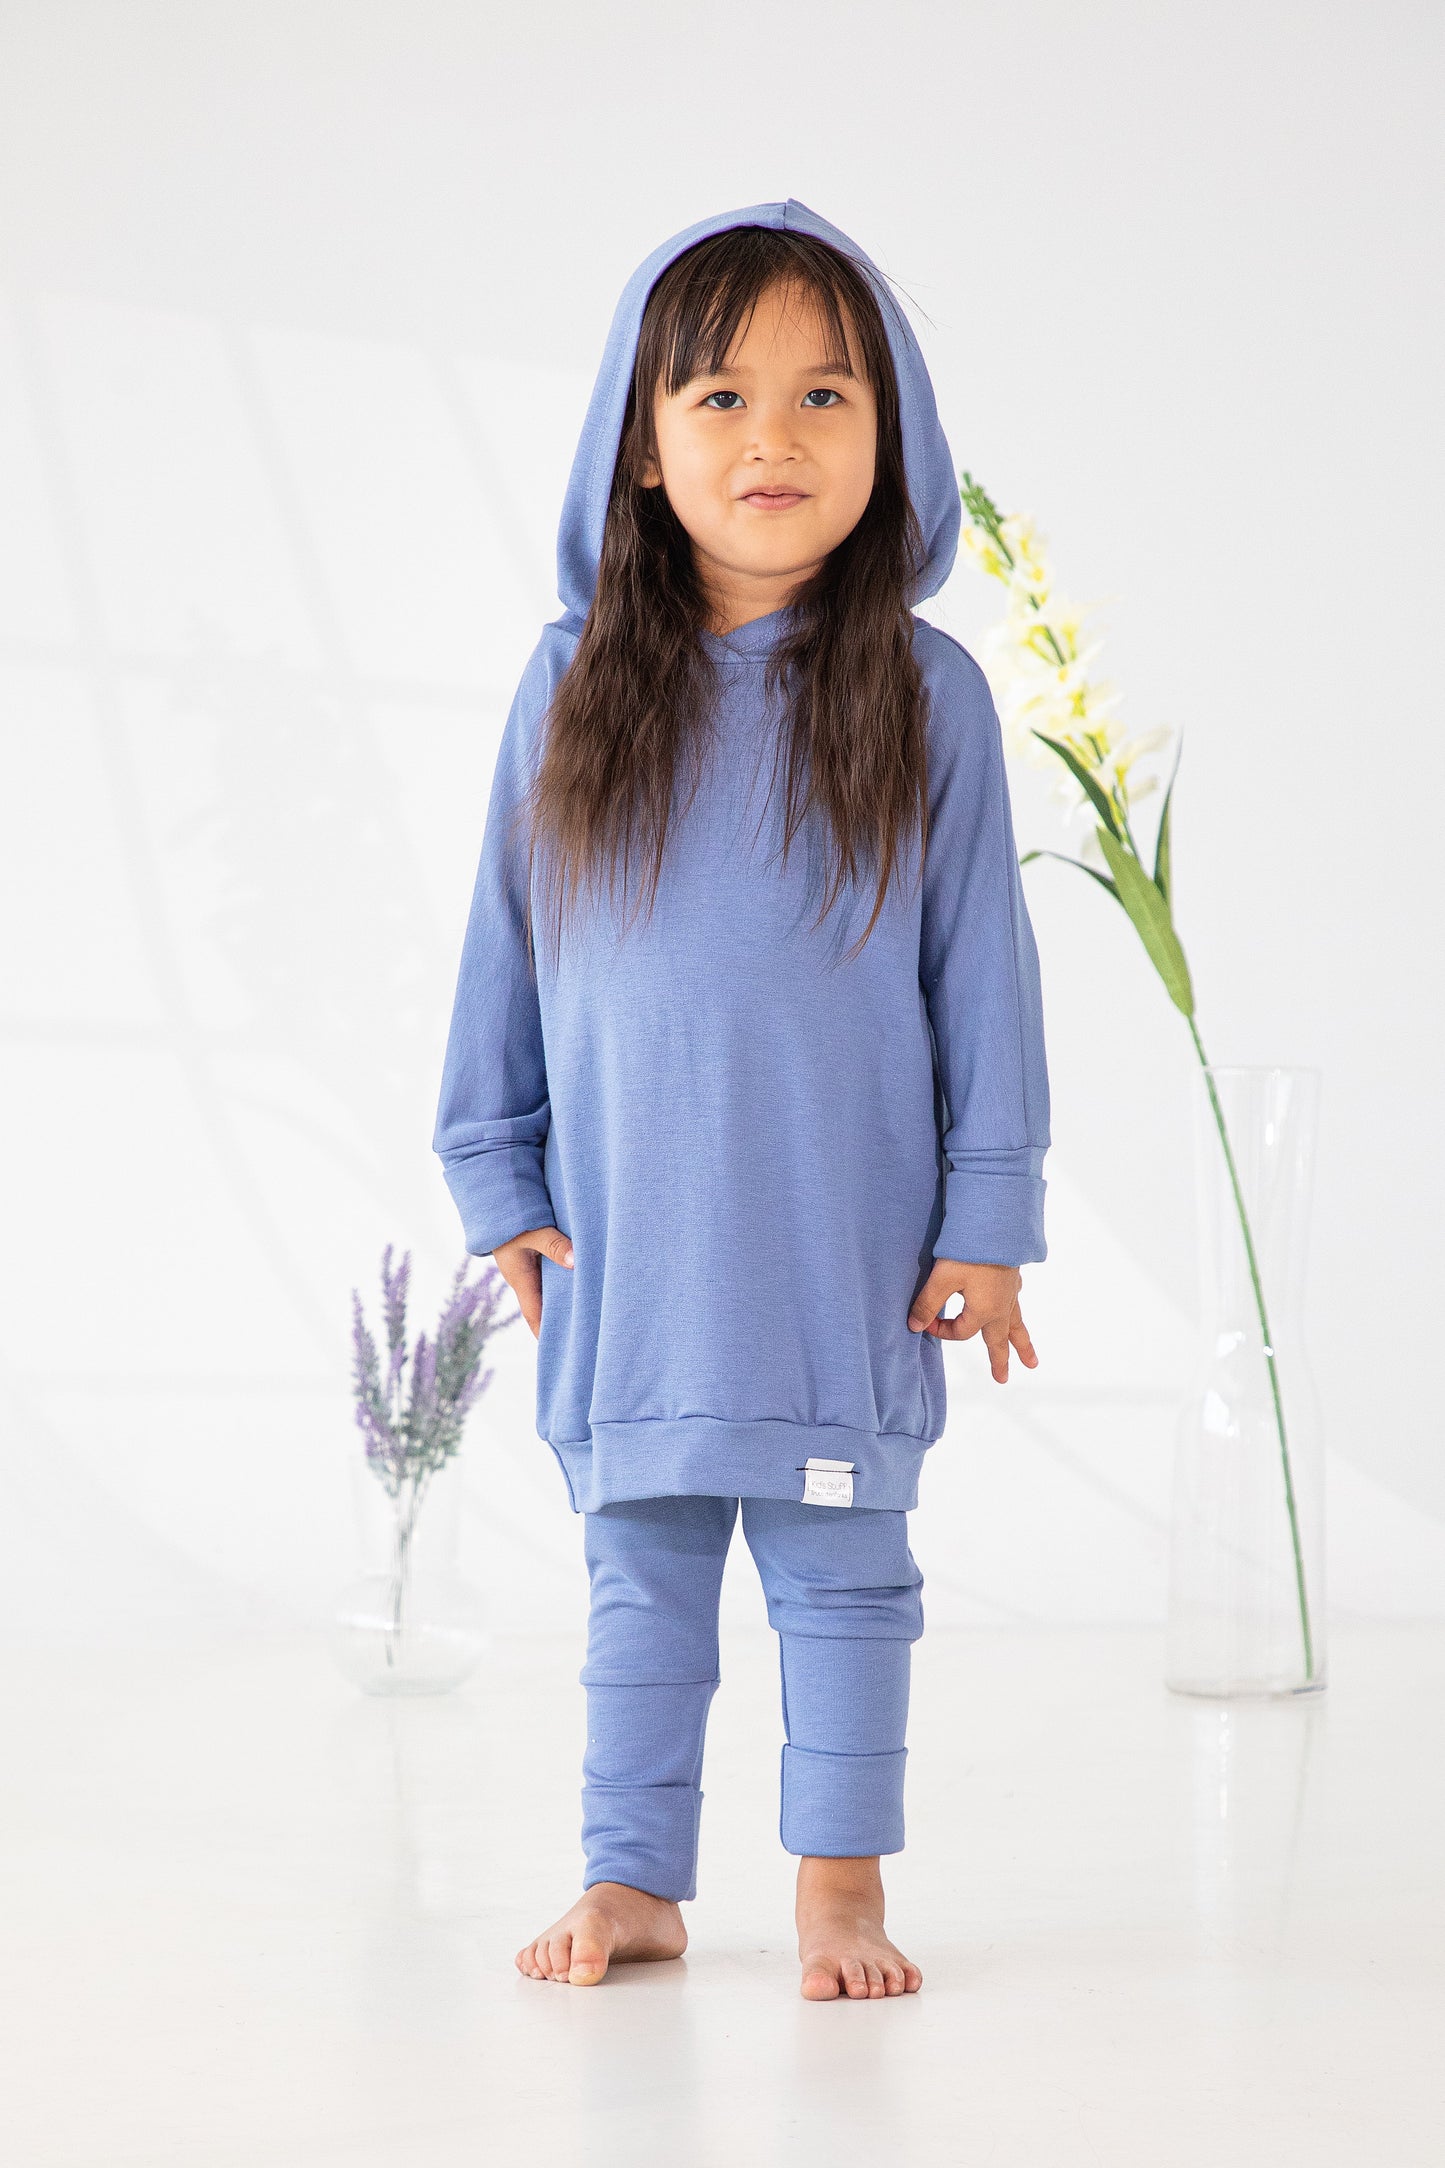 Grow With Me Pants | Bluebell